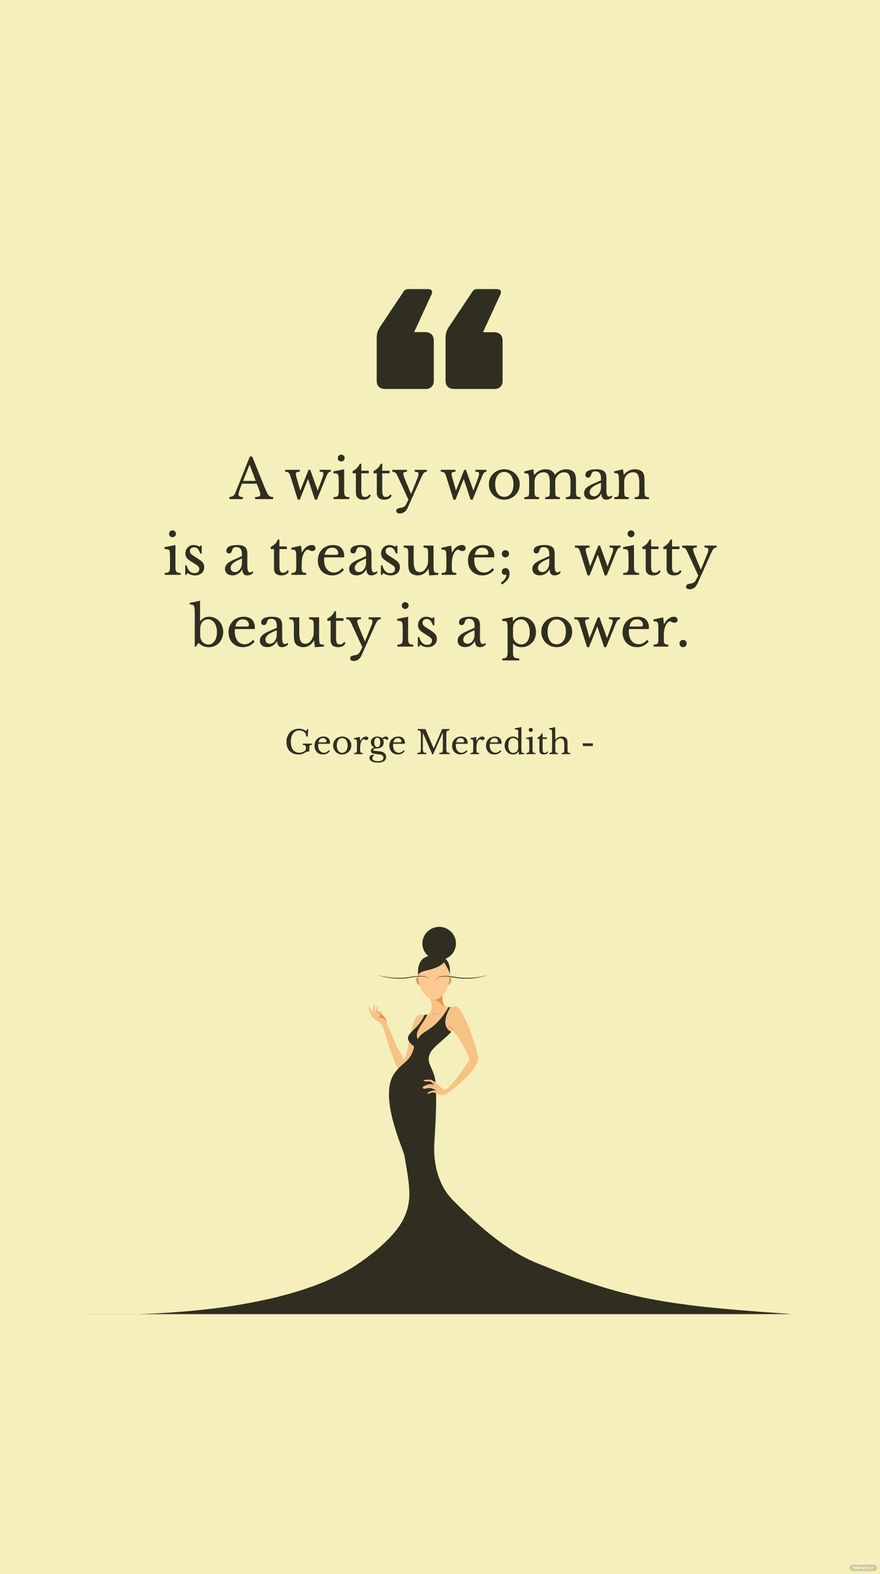 George Meredith - A witty woman is a treasure; a witty beauty is a power.